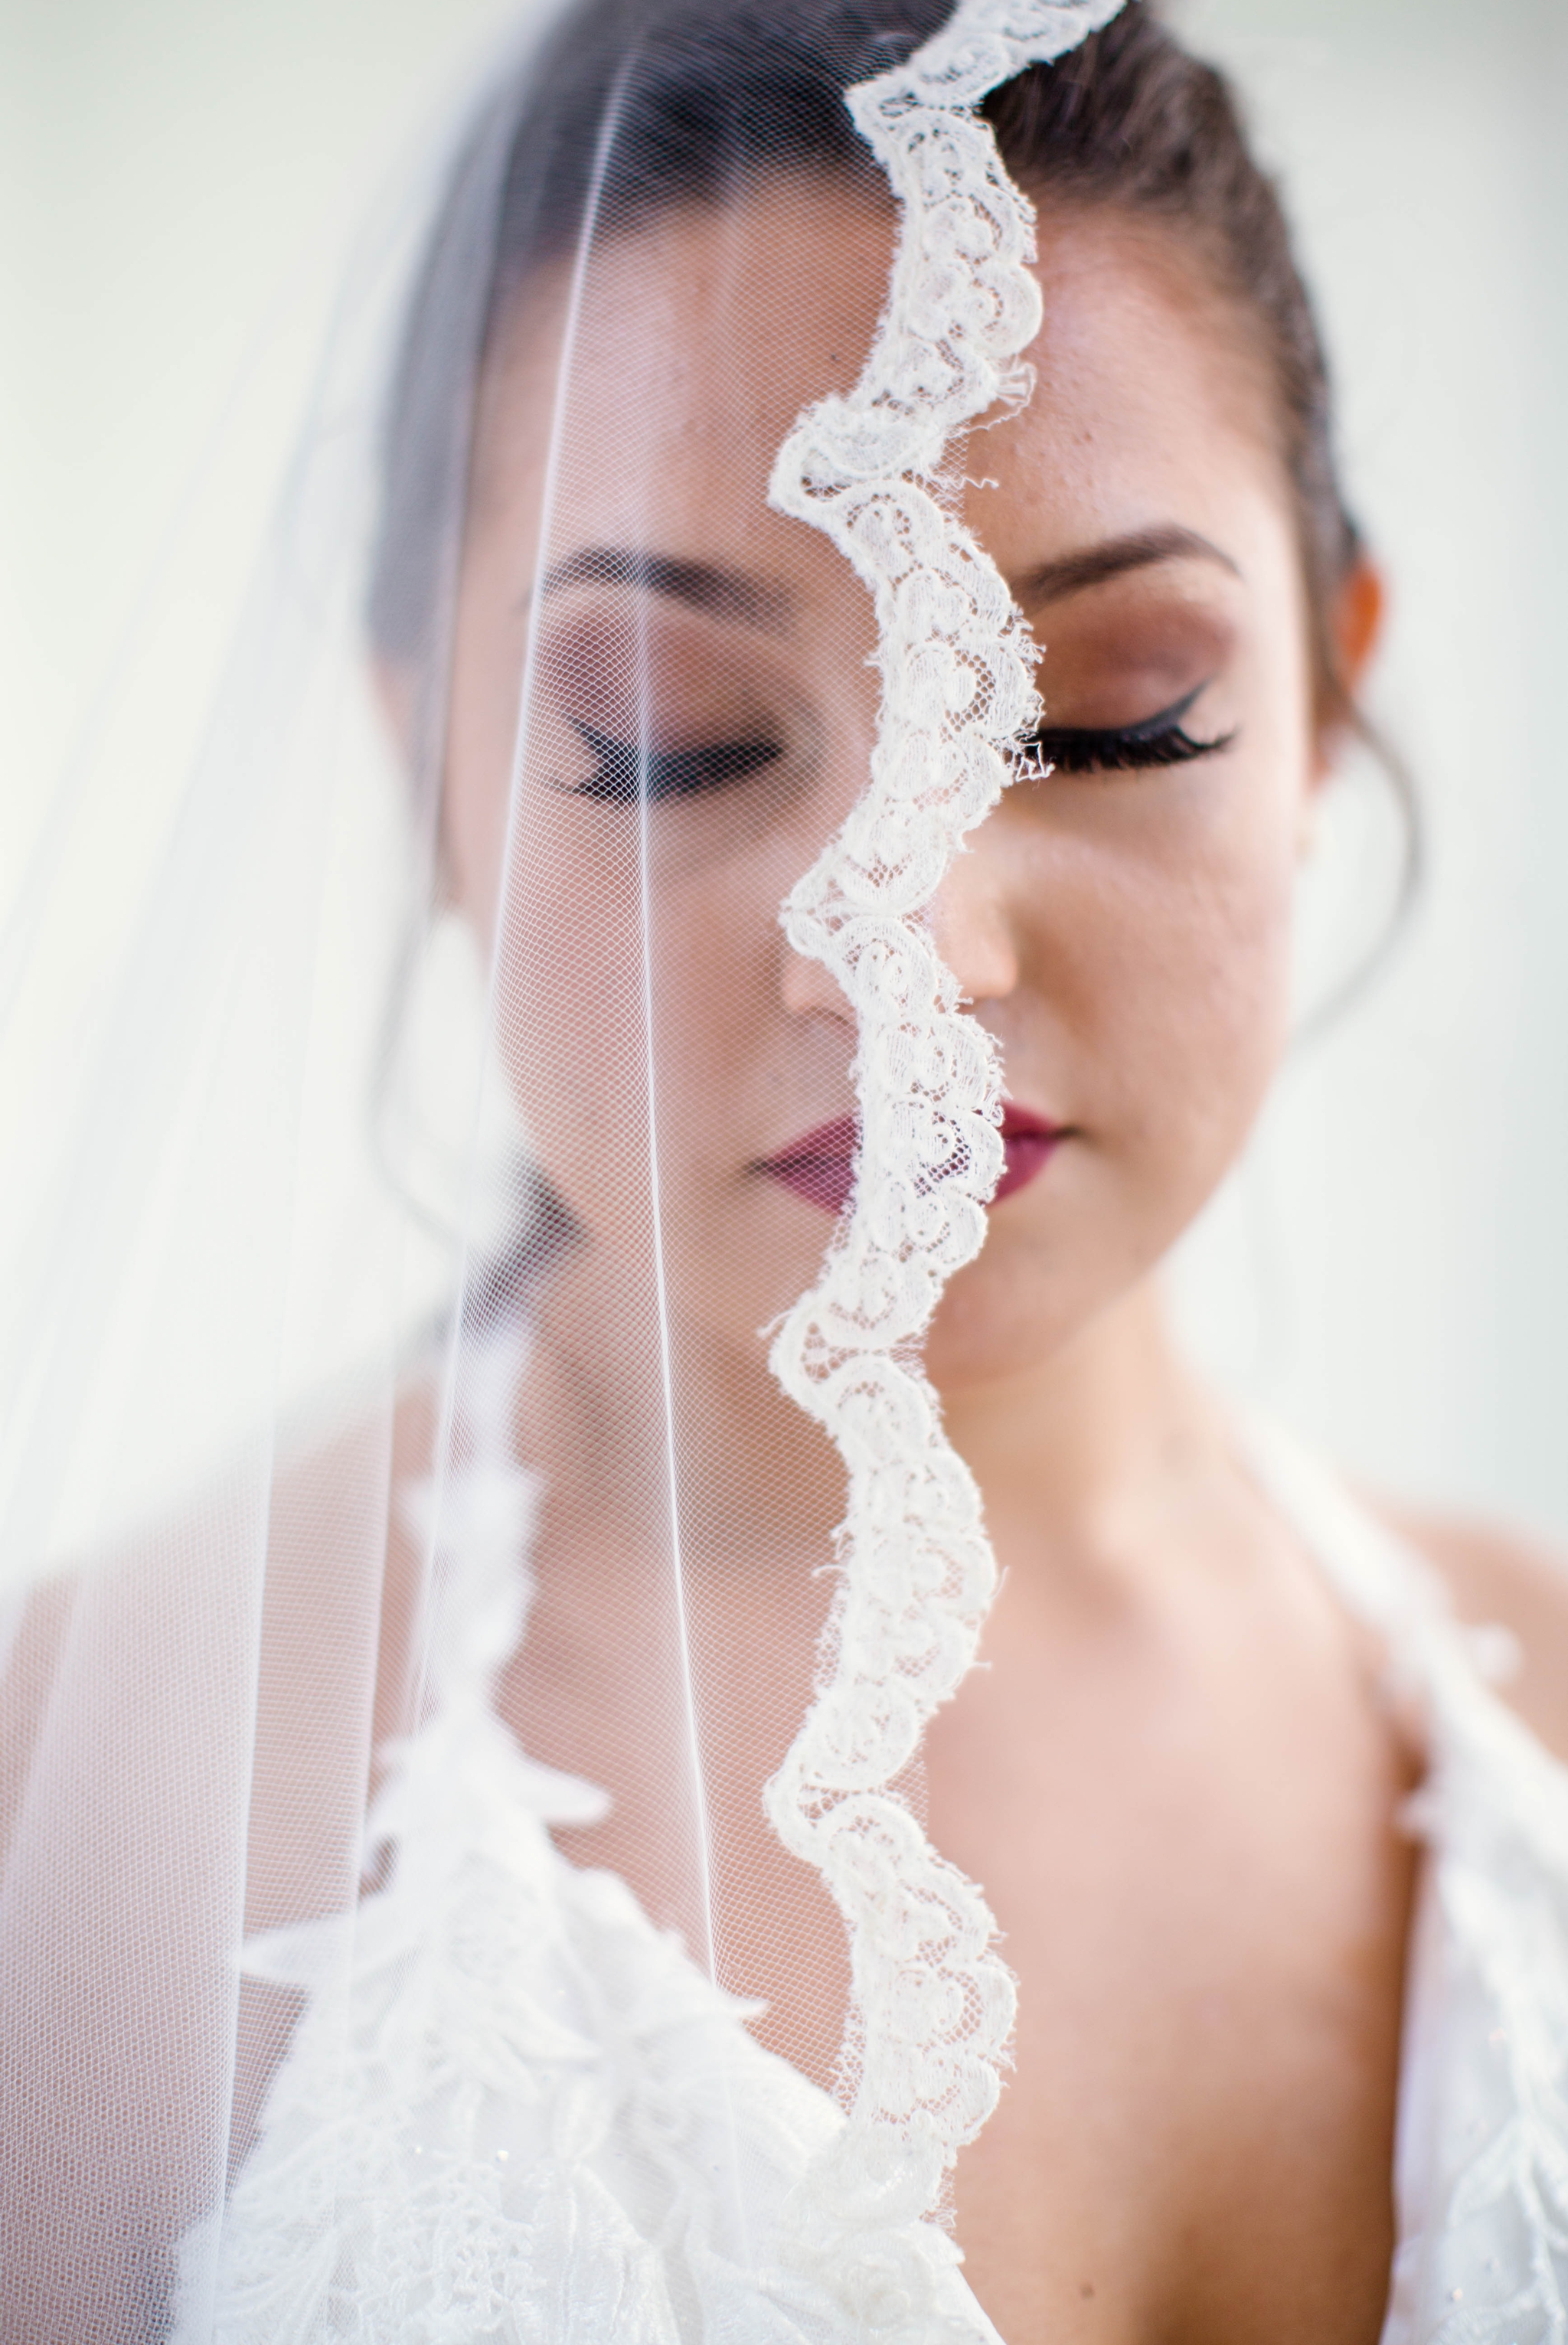  Bridal Beauty Shot with the veil over her face - Natural light Bridal Portraits in an all white luxury estate venue with black and white floors and a golden chandelier - Bride is wearing a Ballgown Wedding Dress by Sherri Hill - shot with available 